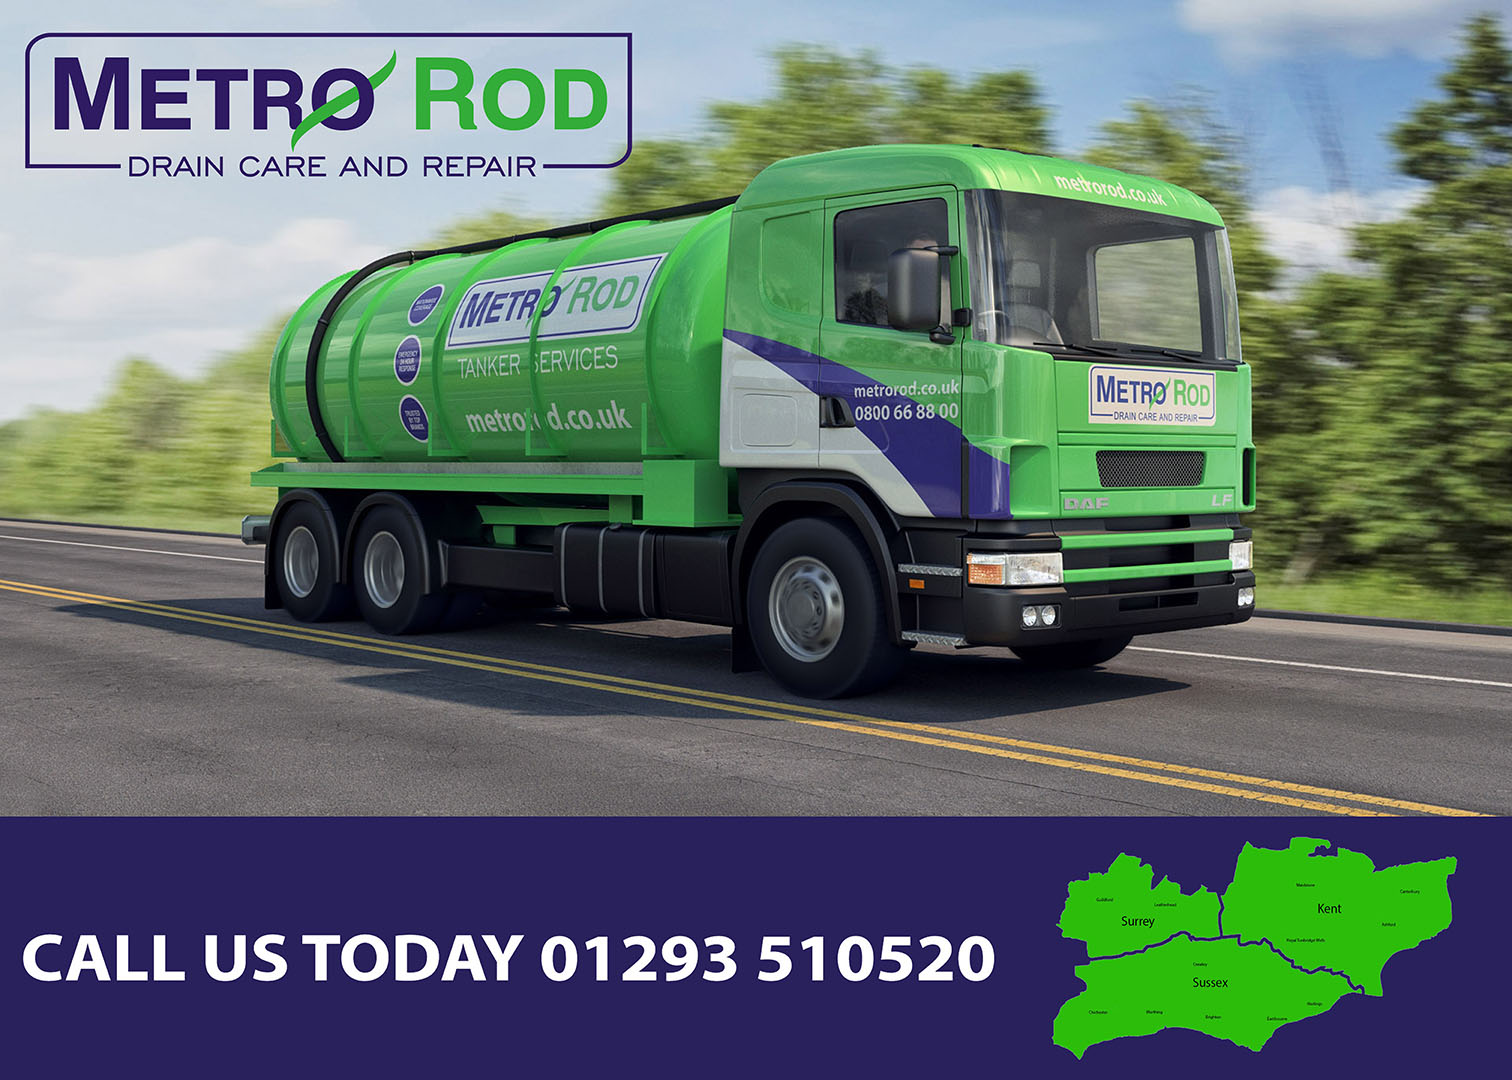 ARE YOU IN NEED OF OUR TANKER SERVICES?